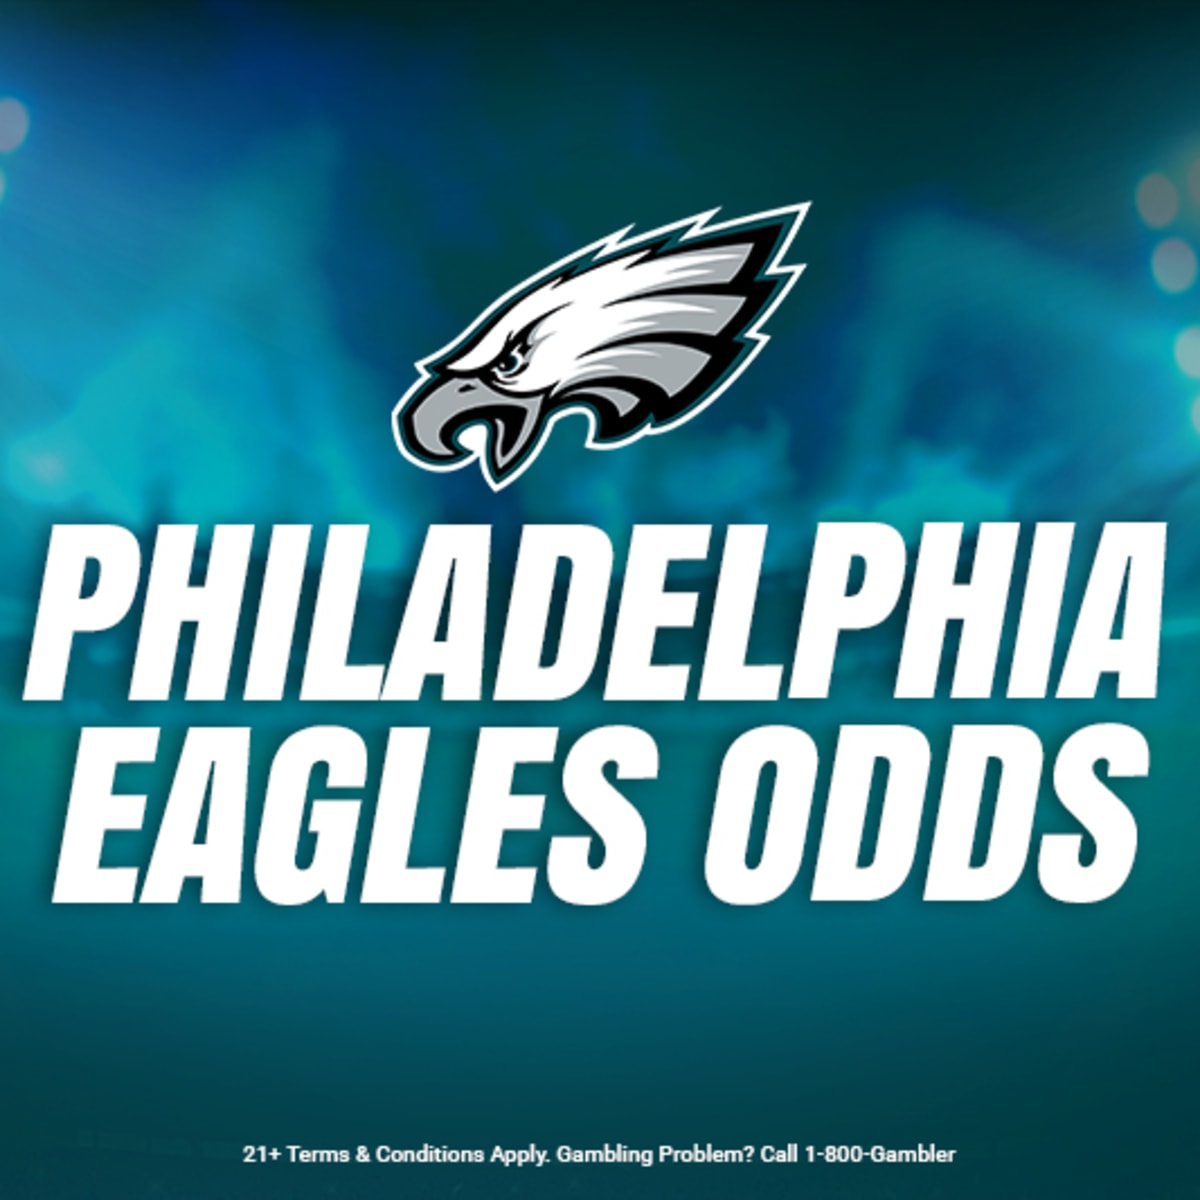 eagles eagles playoff it's a philly thing